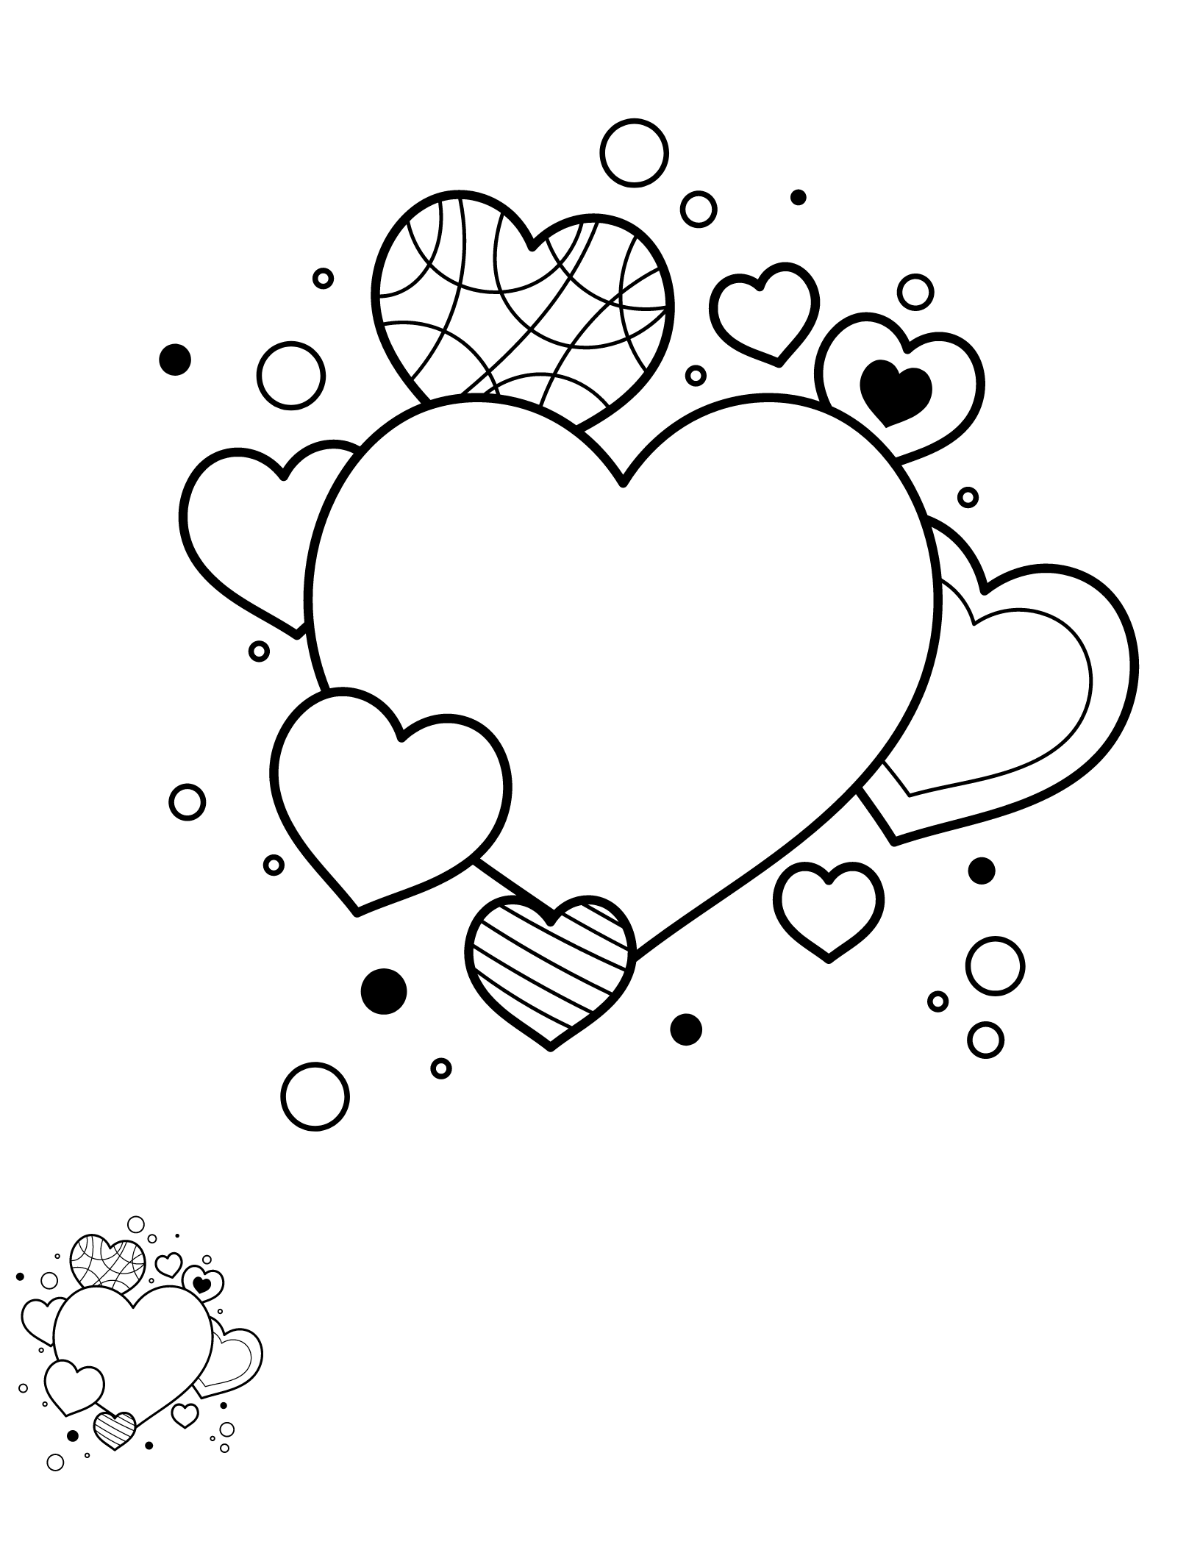 Heart Coloring Page for Adults Template